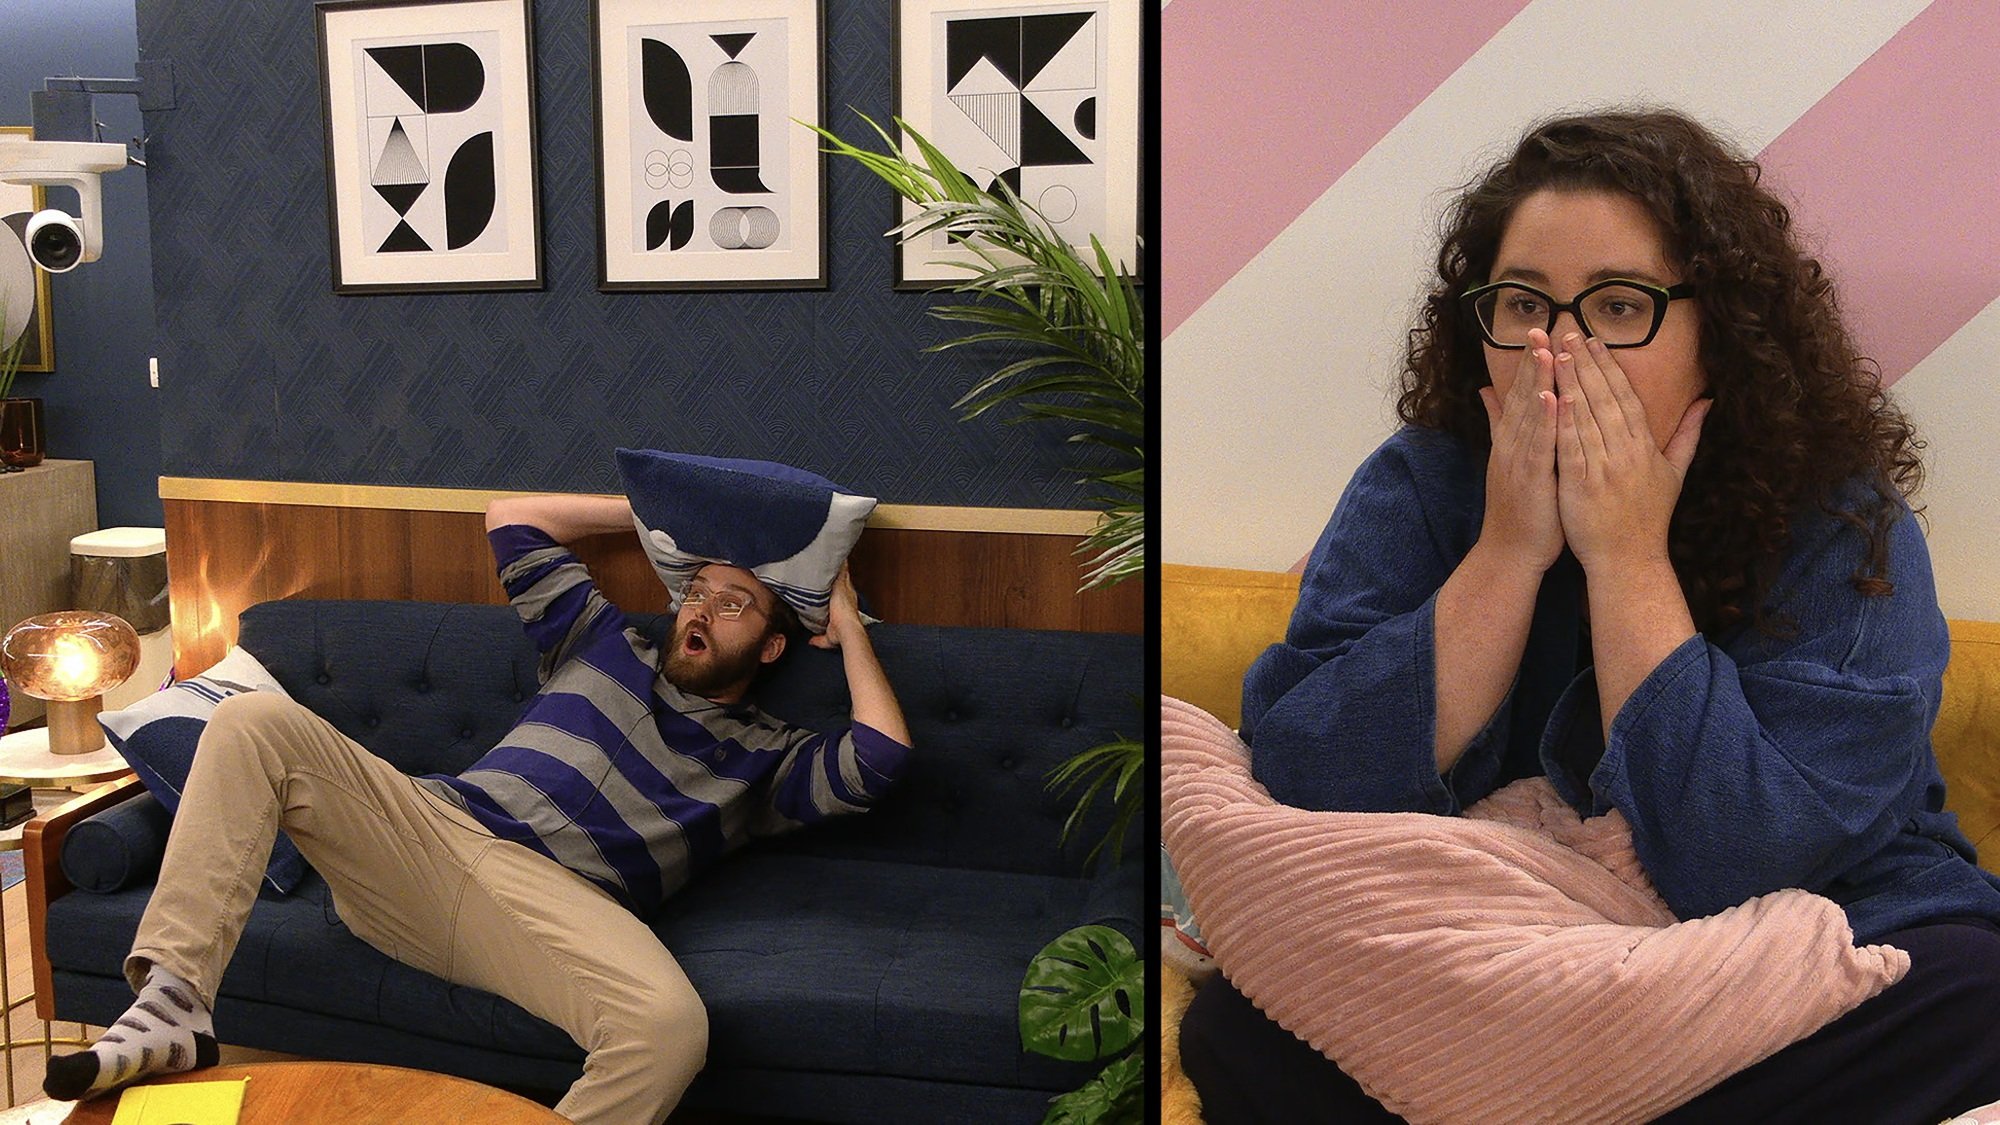 A split-screen view of one man freaking out on a couch and one woman clapping her hands over her mouth in surprise.